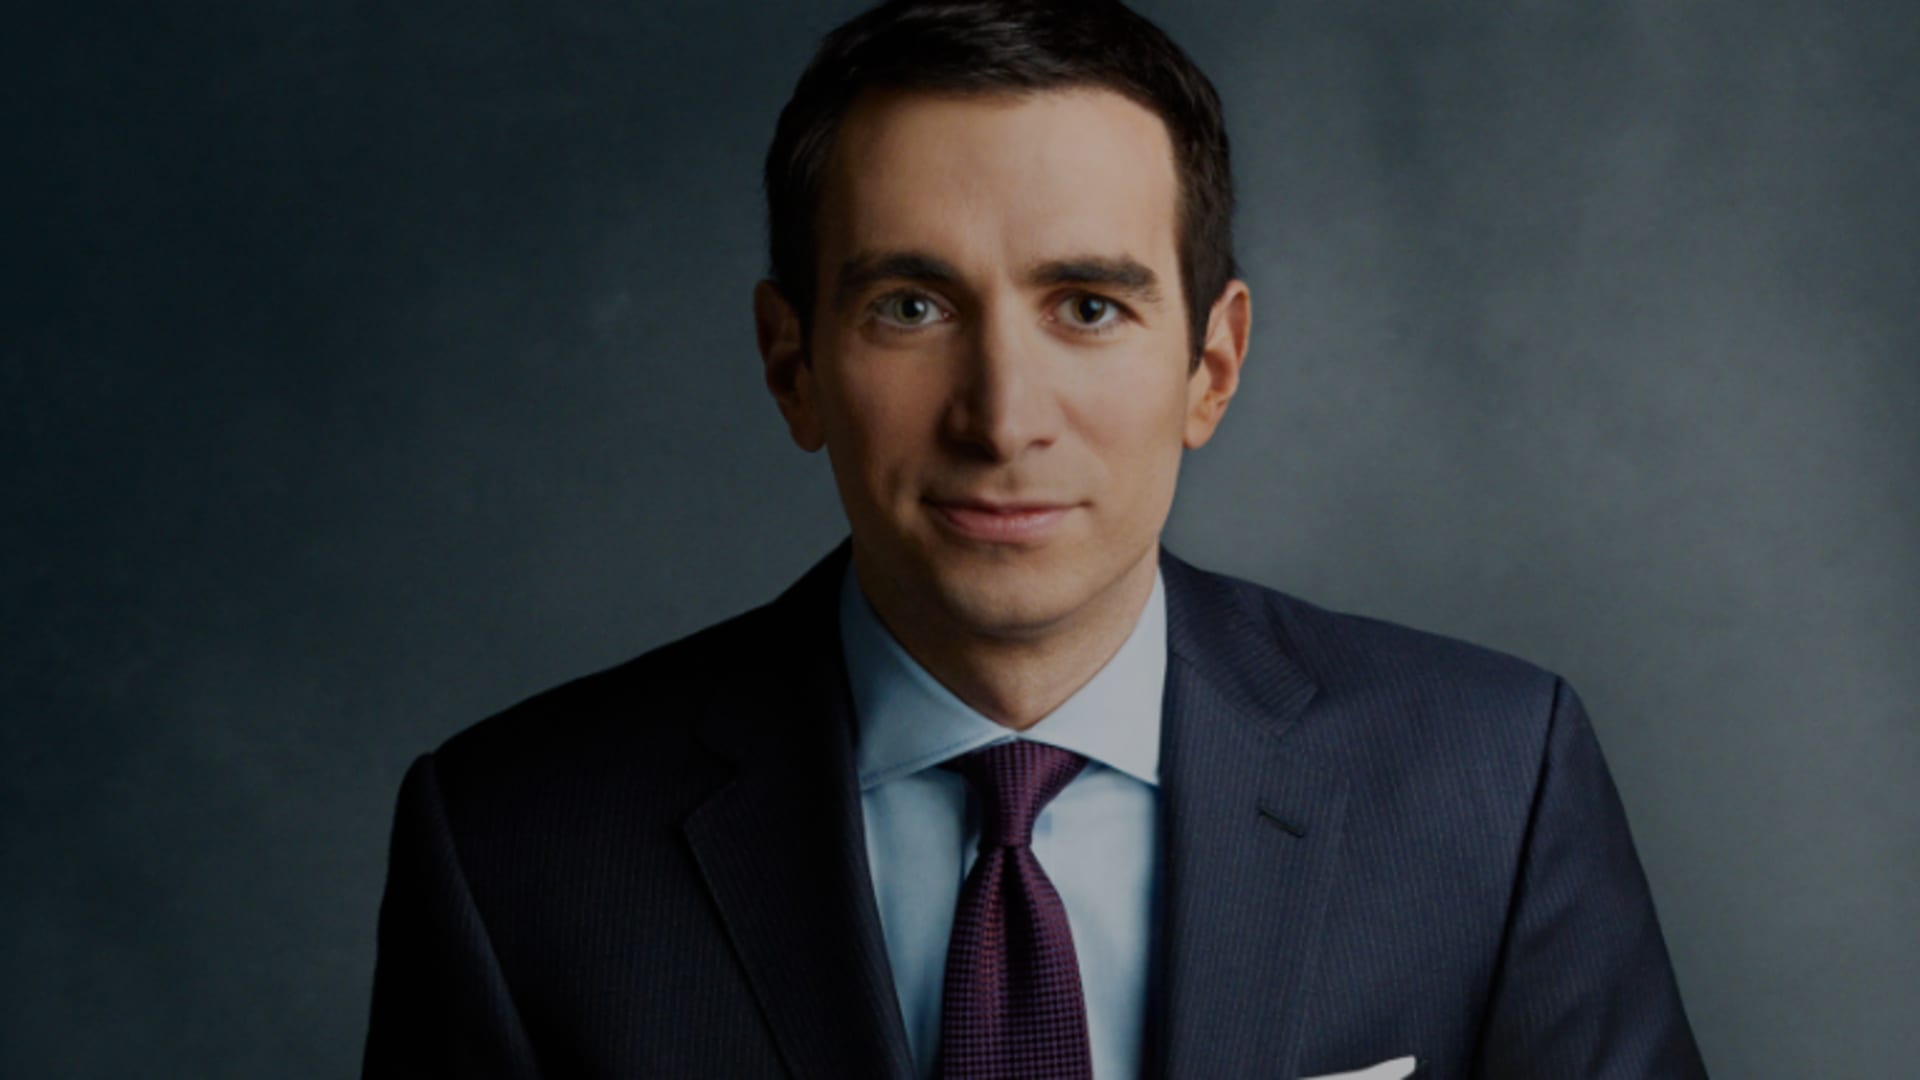 The question CNBCs Andrew Ross Sorkin asks himself 100 times a day to be more successful